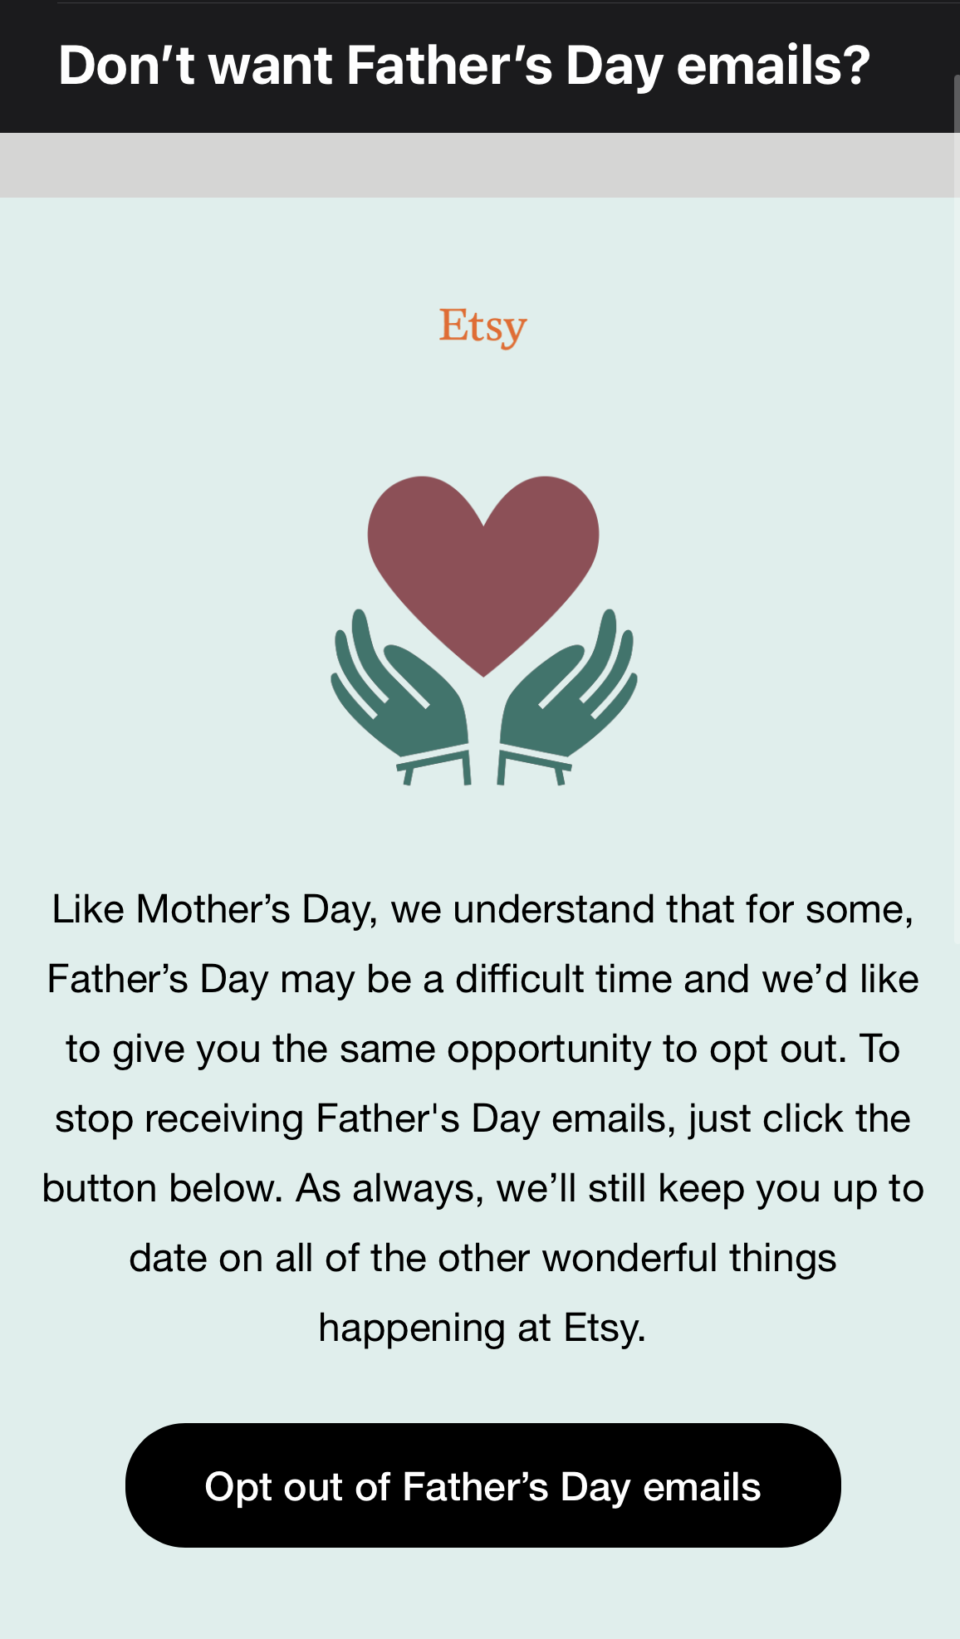 Like Mother's Day, we understand that for some, Father's Day may be a difficult time and we'd like to give you the same opportunity to opt out. To stop receiving Father's Day emails, just click the button below. As always, we'll still keep you up to date on all of the other wonderful things happening at Etsy.